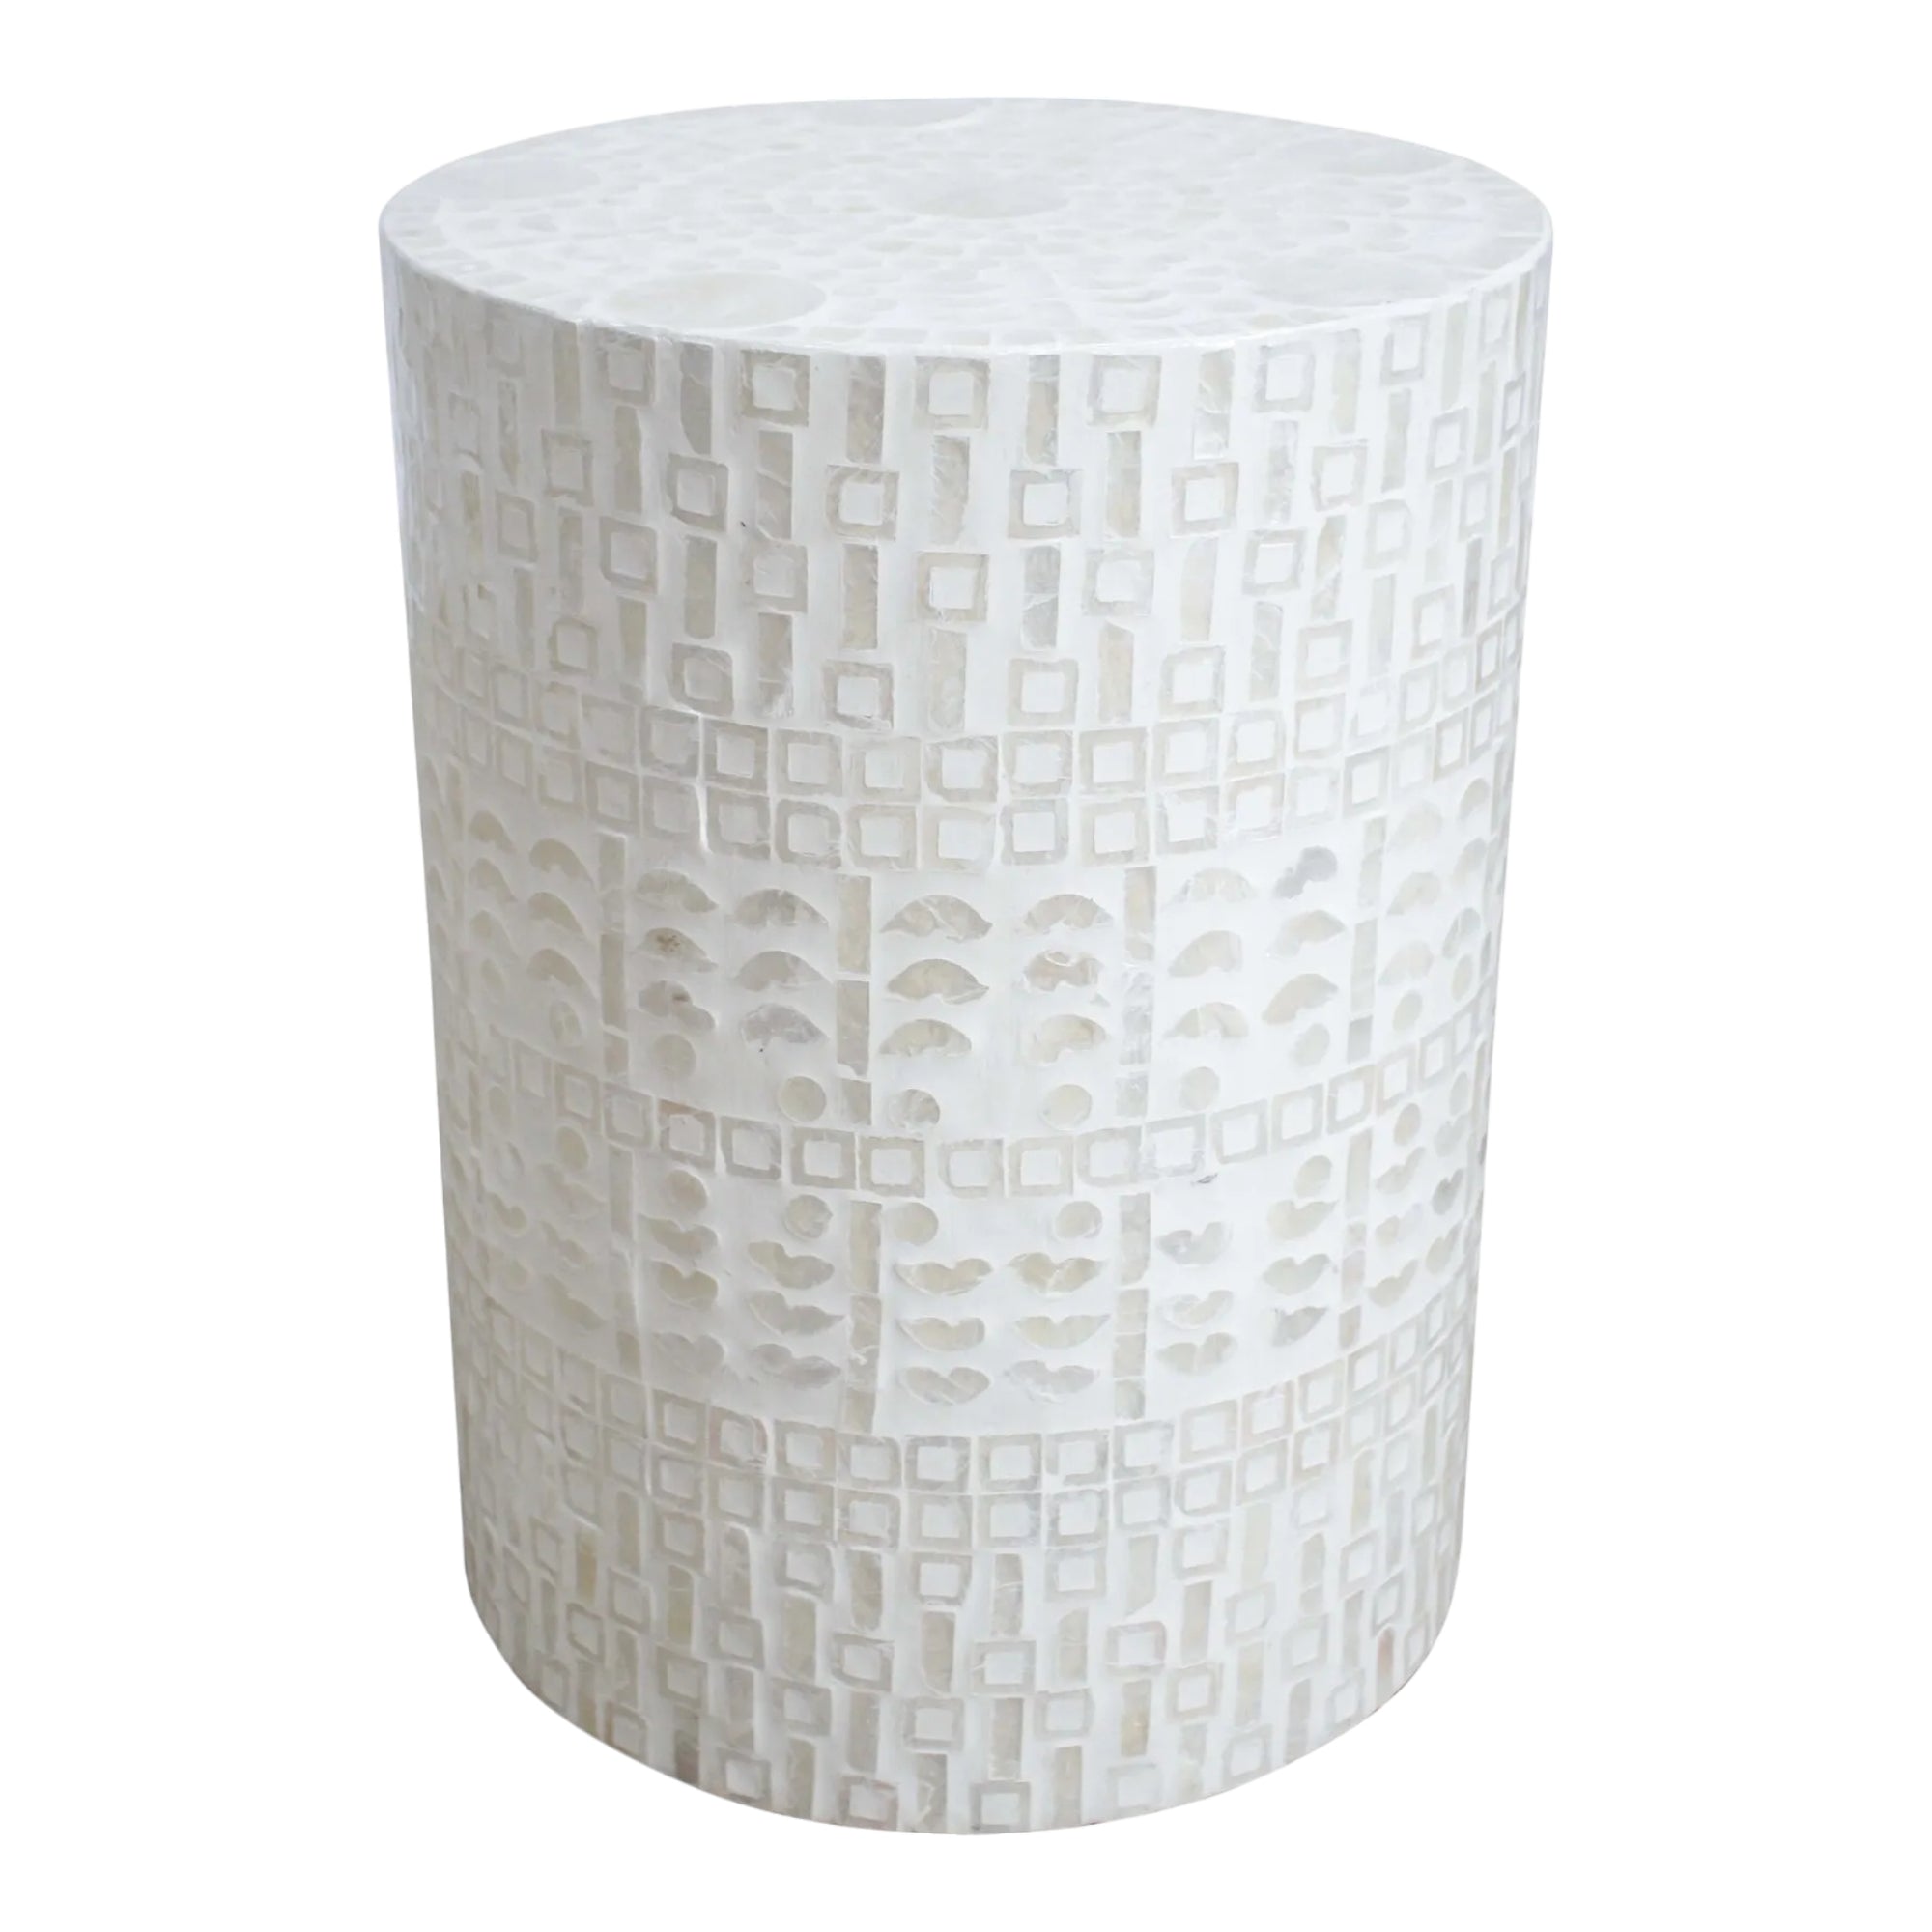 Ivory stool with patterns 